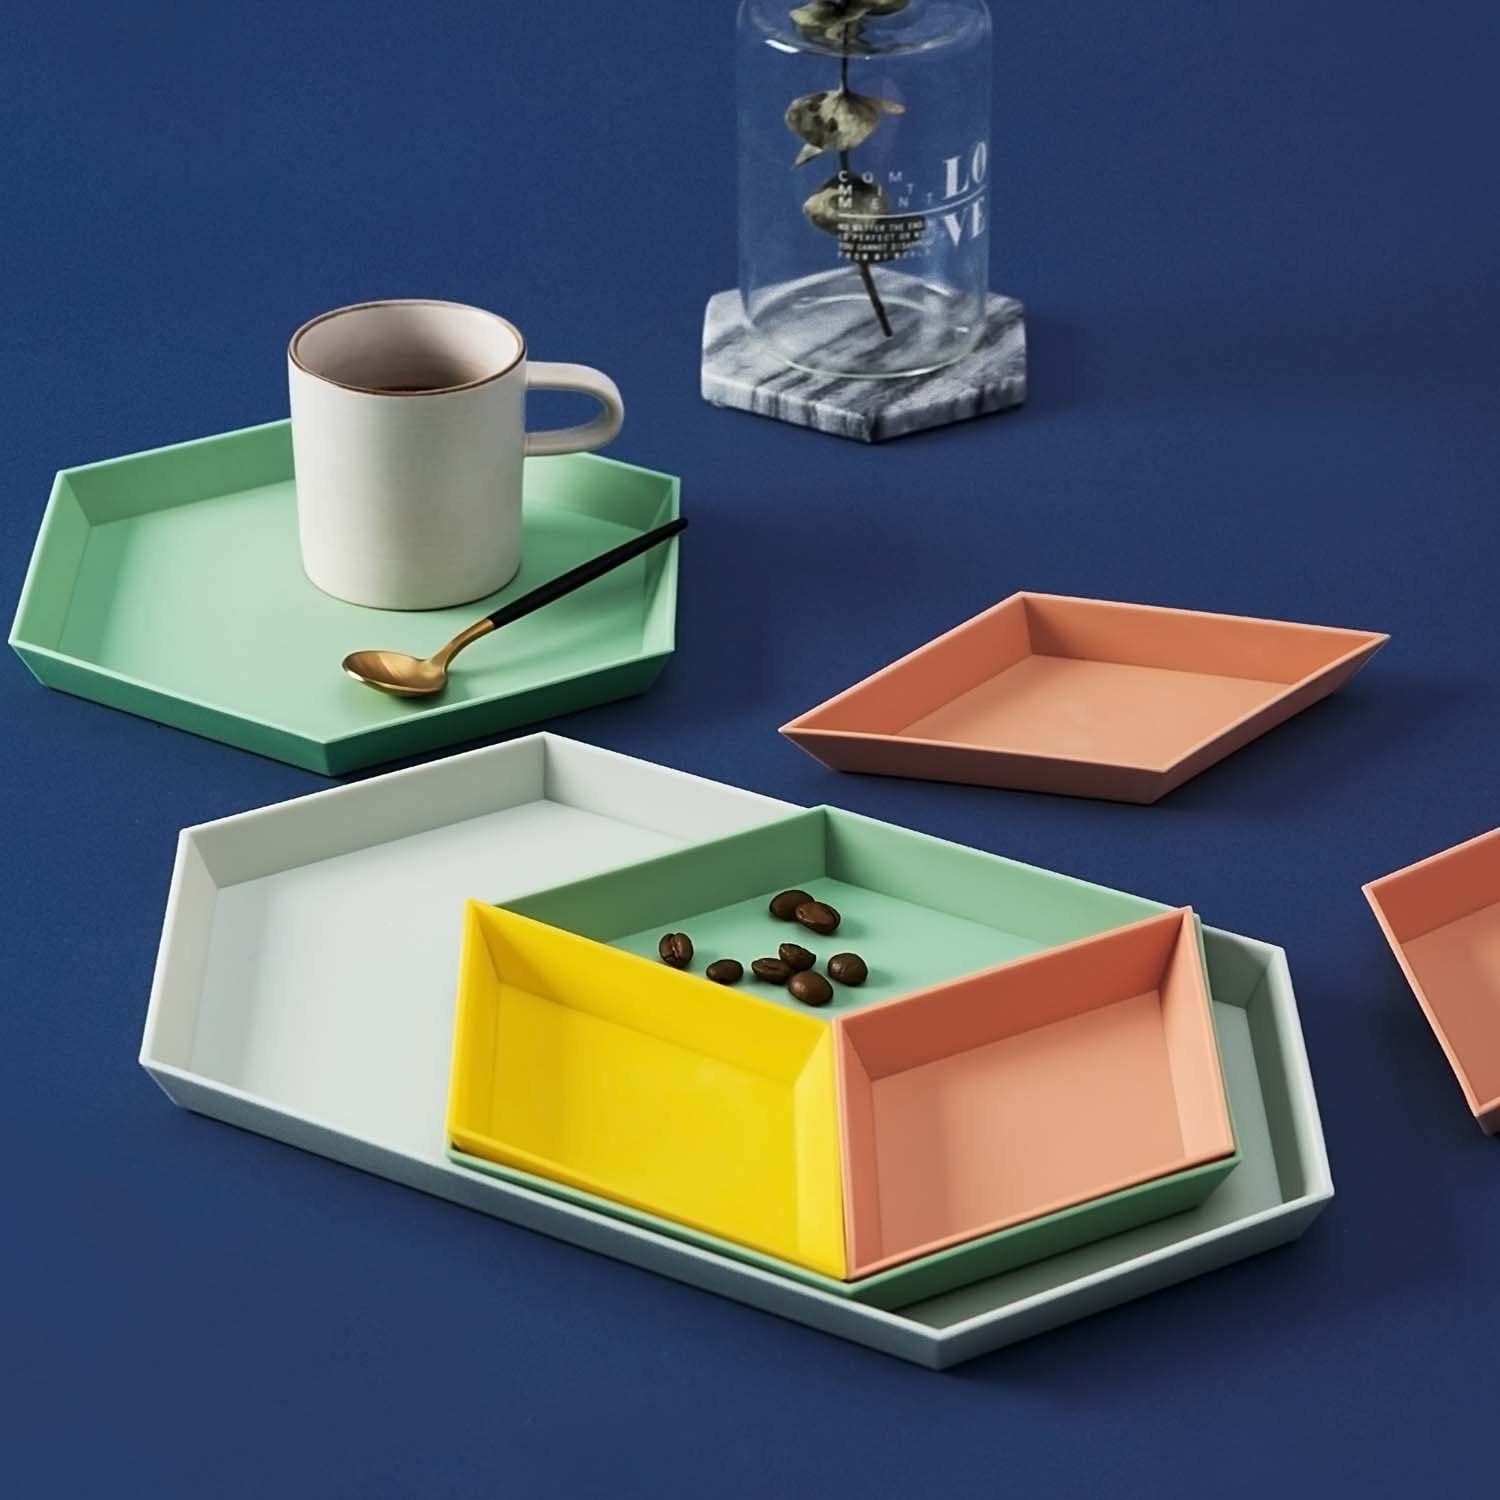 the full set of trays holding a mug and a few coffee beans